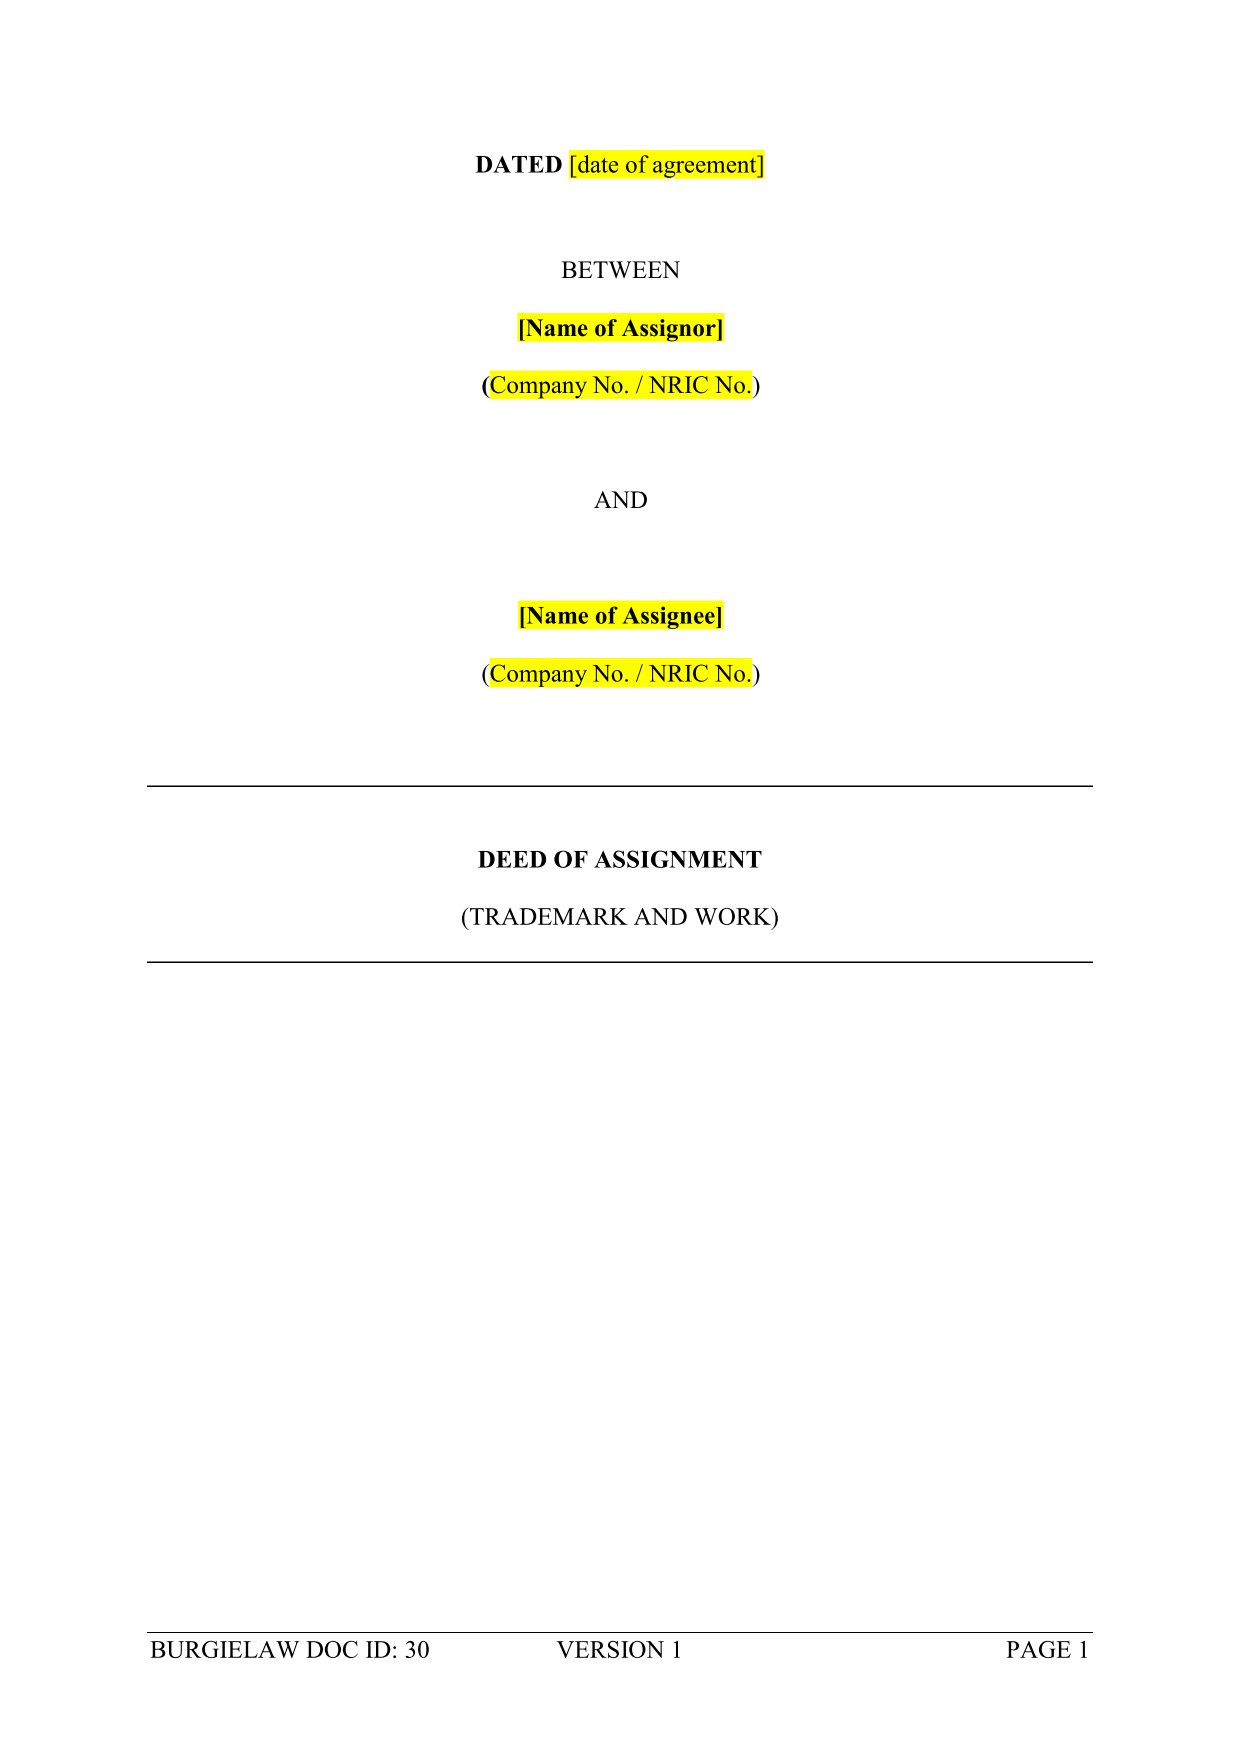 Deed of Assignment for Trademark Template - BurgieLaw Throughout trademark assignment agreement template